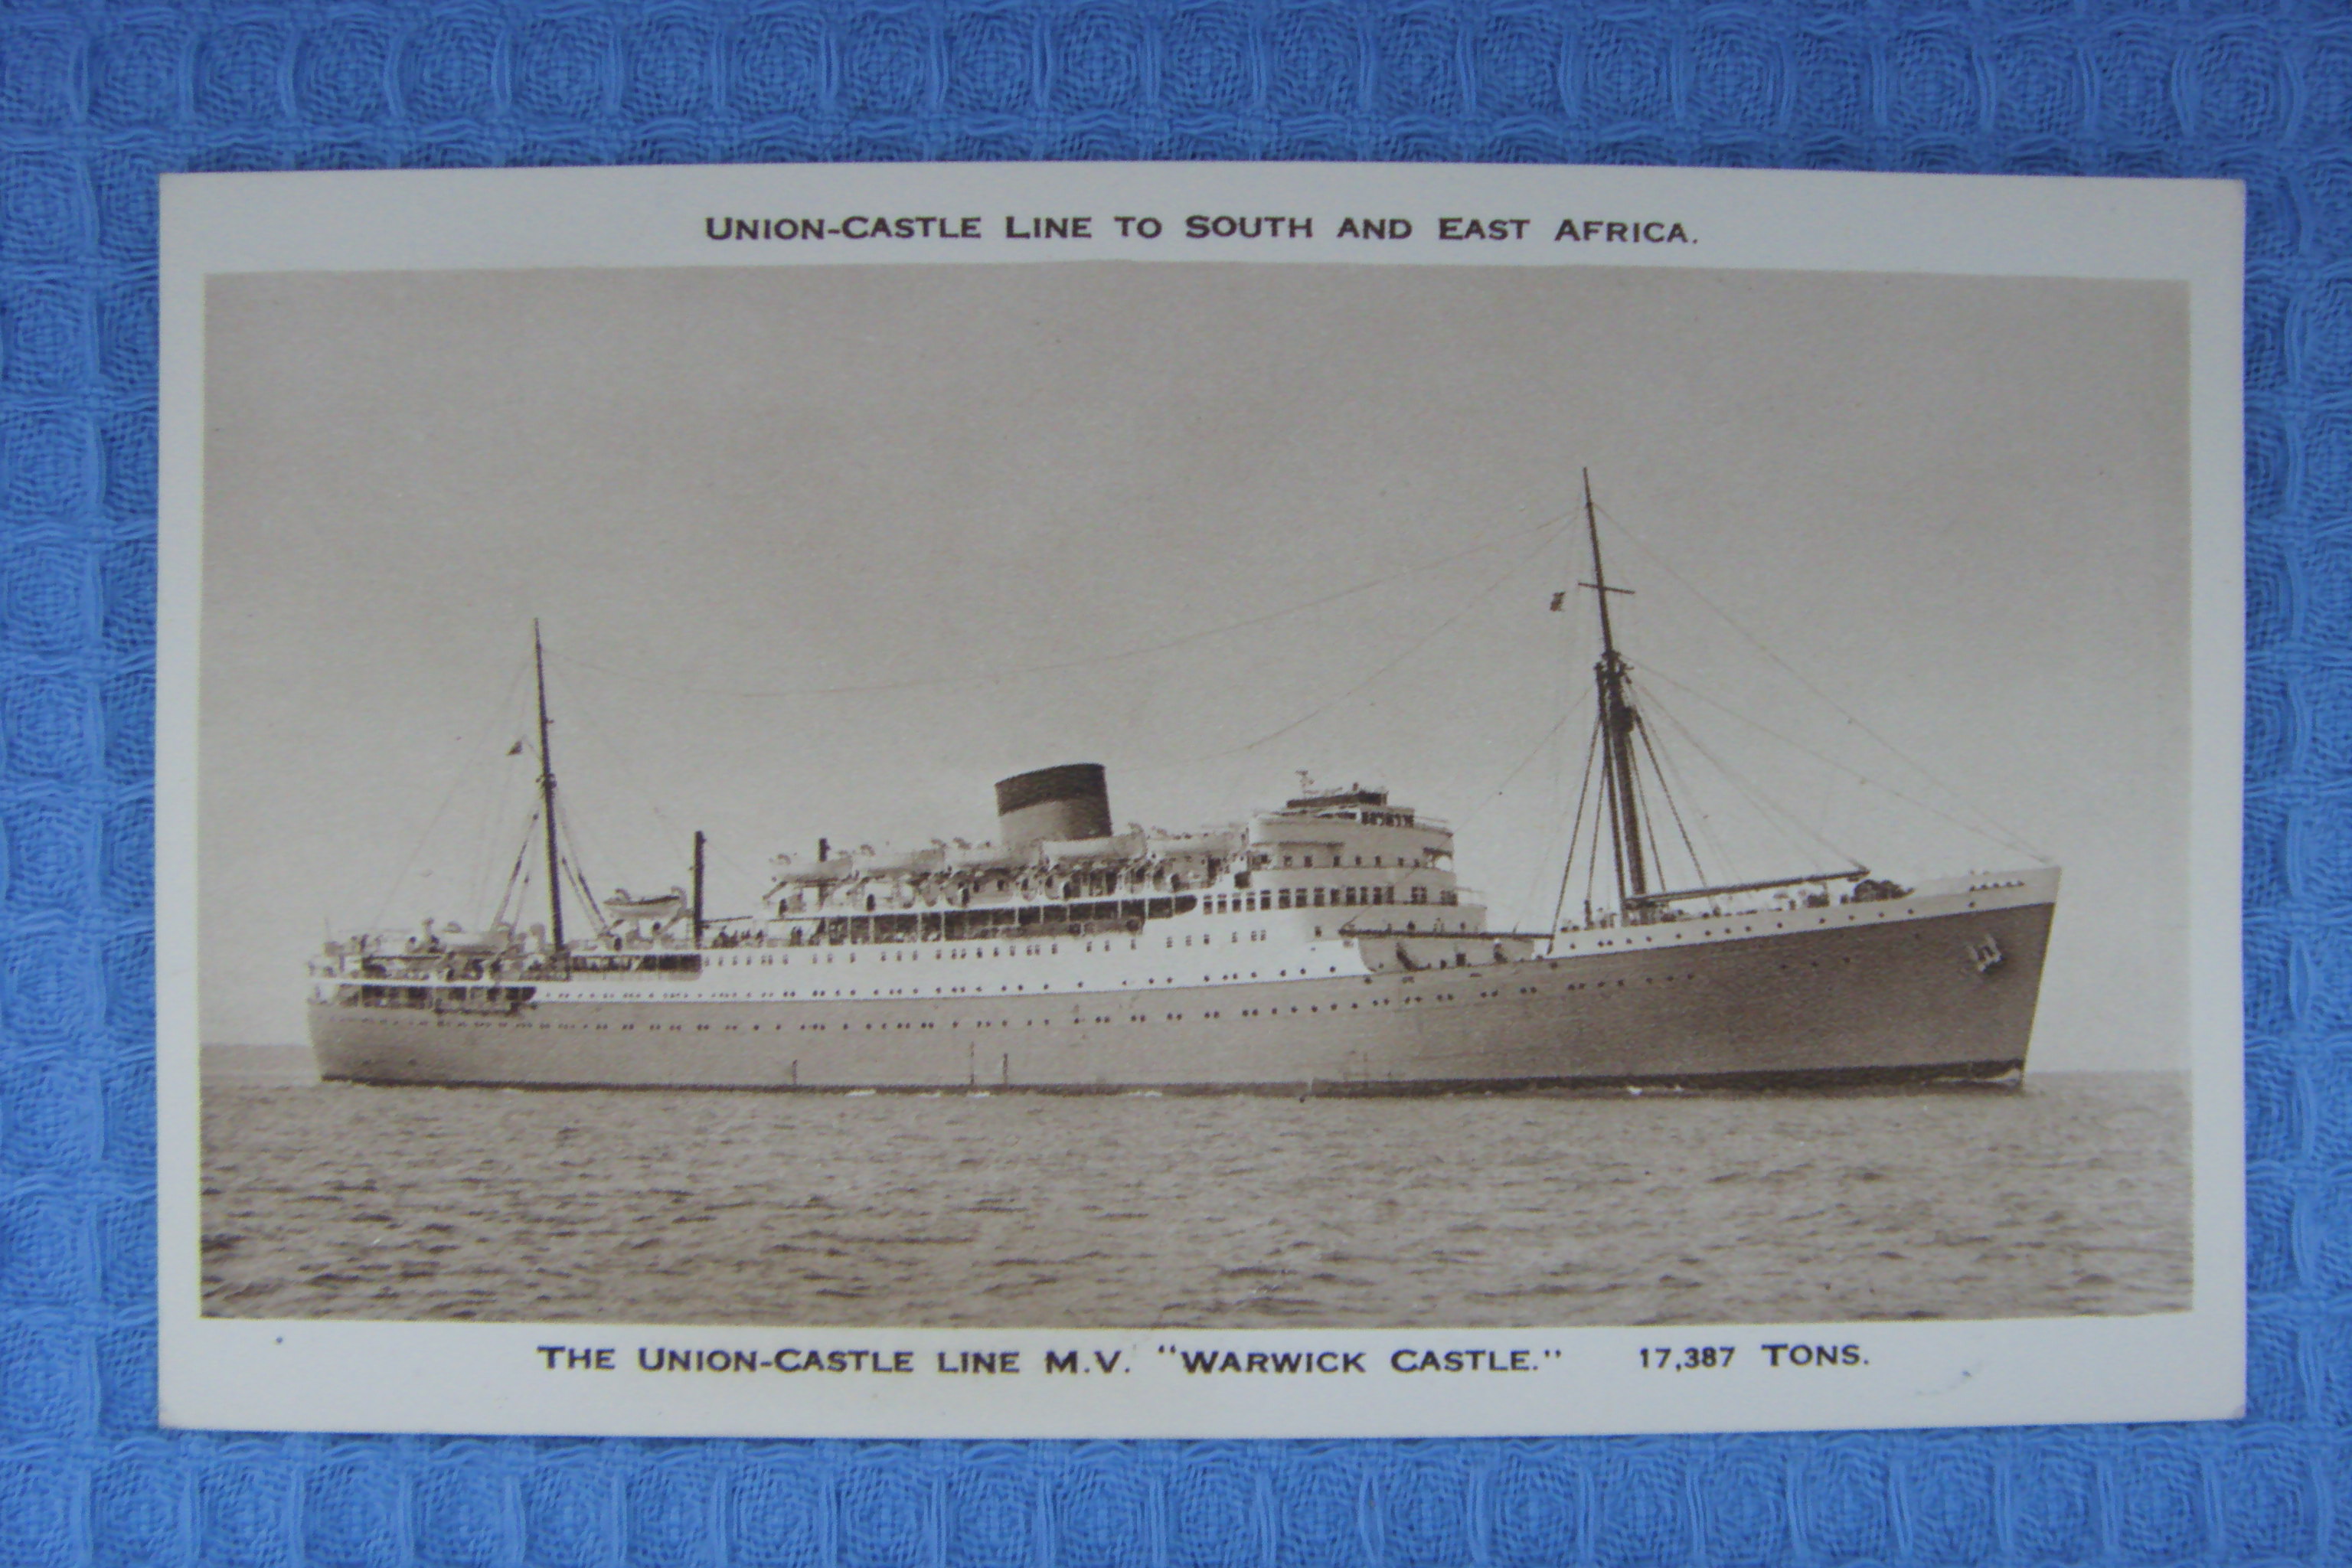 SEPIA POSTCARD FROM THE WARWICK CASTLE OF THE UNION CASTLE LINE SHIPPING COMPANY